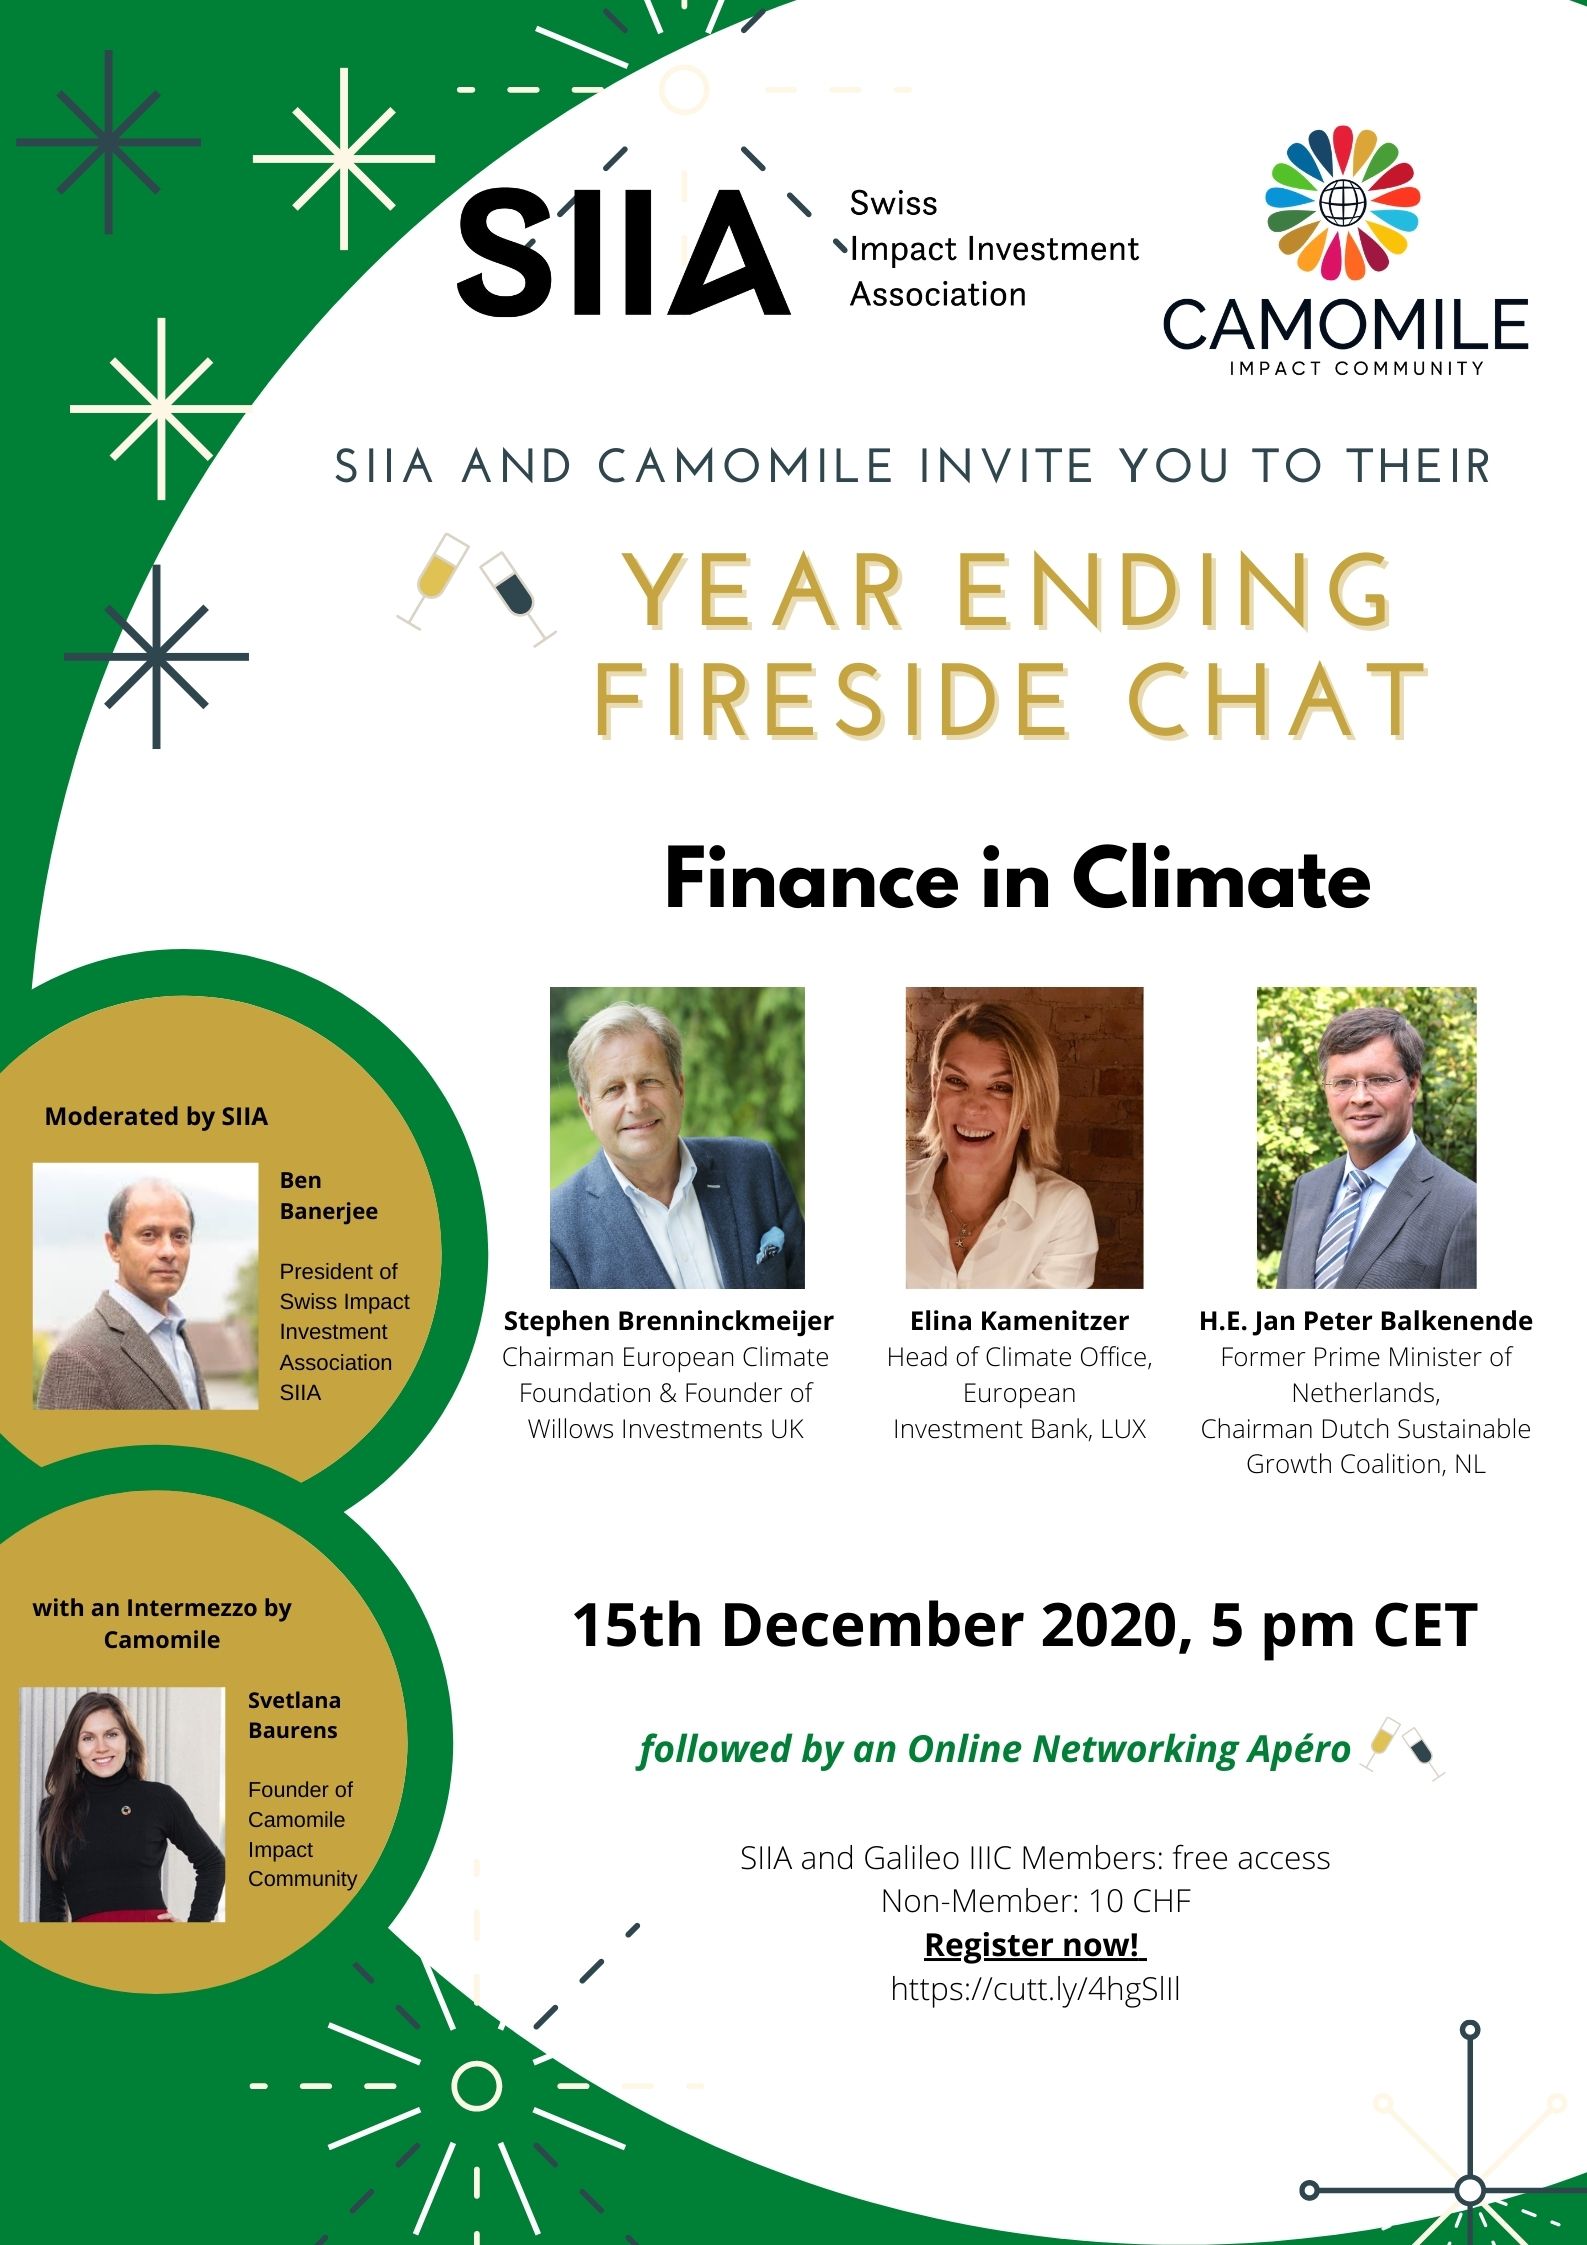 Finance in Climate organized by SIIA